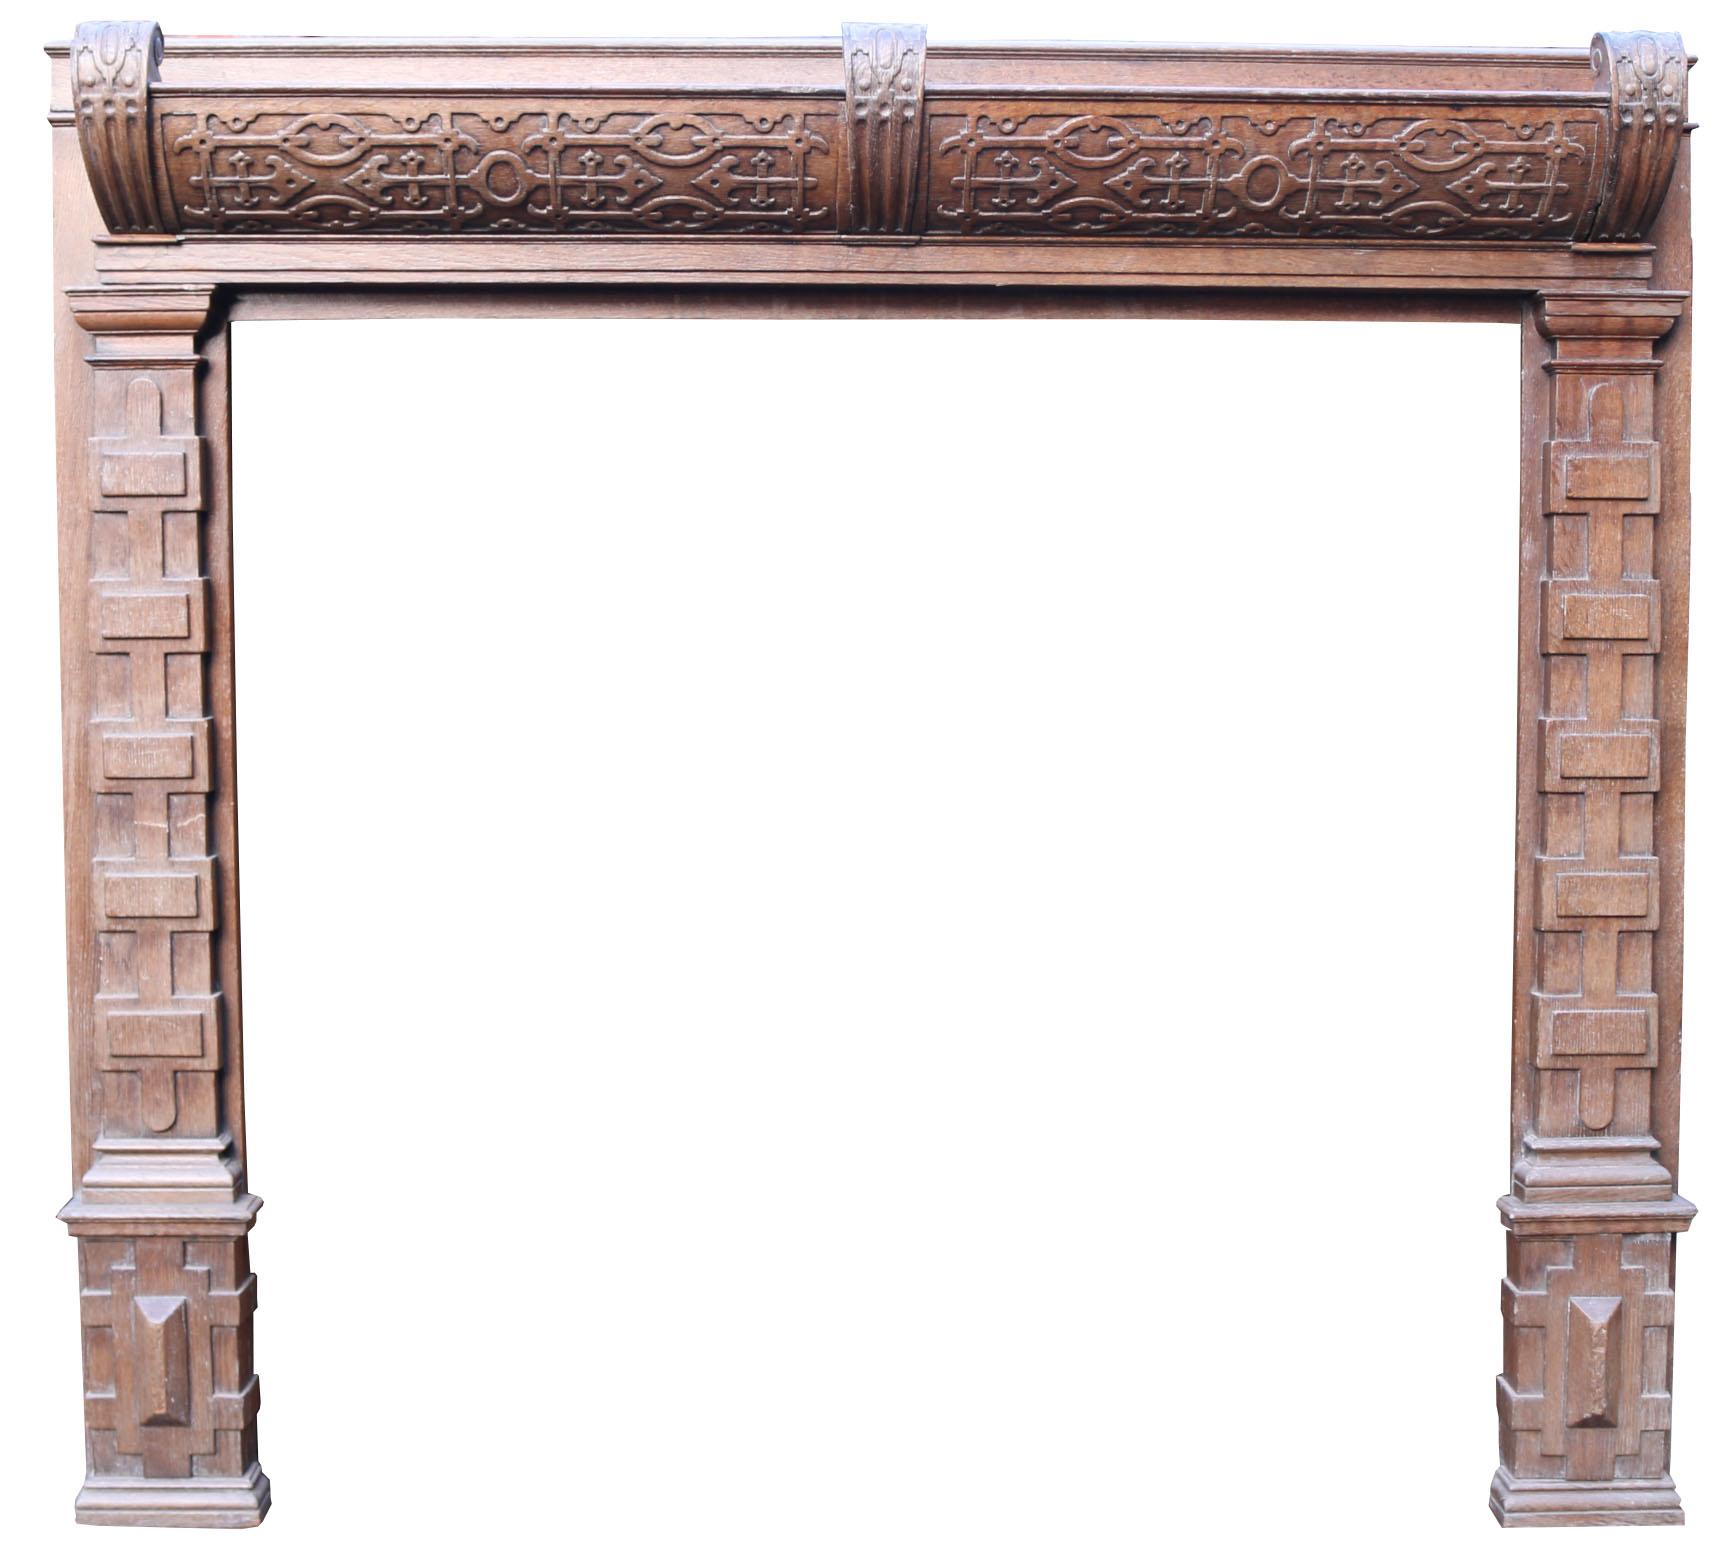 Antique English Jacobean Style Fire Mantel In Good Condition For Sale In Wormelow, Herefordshire